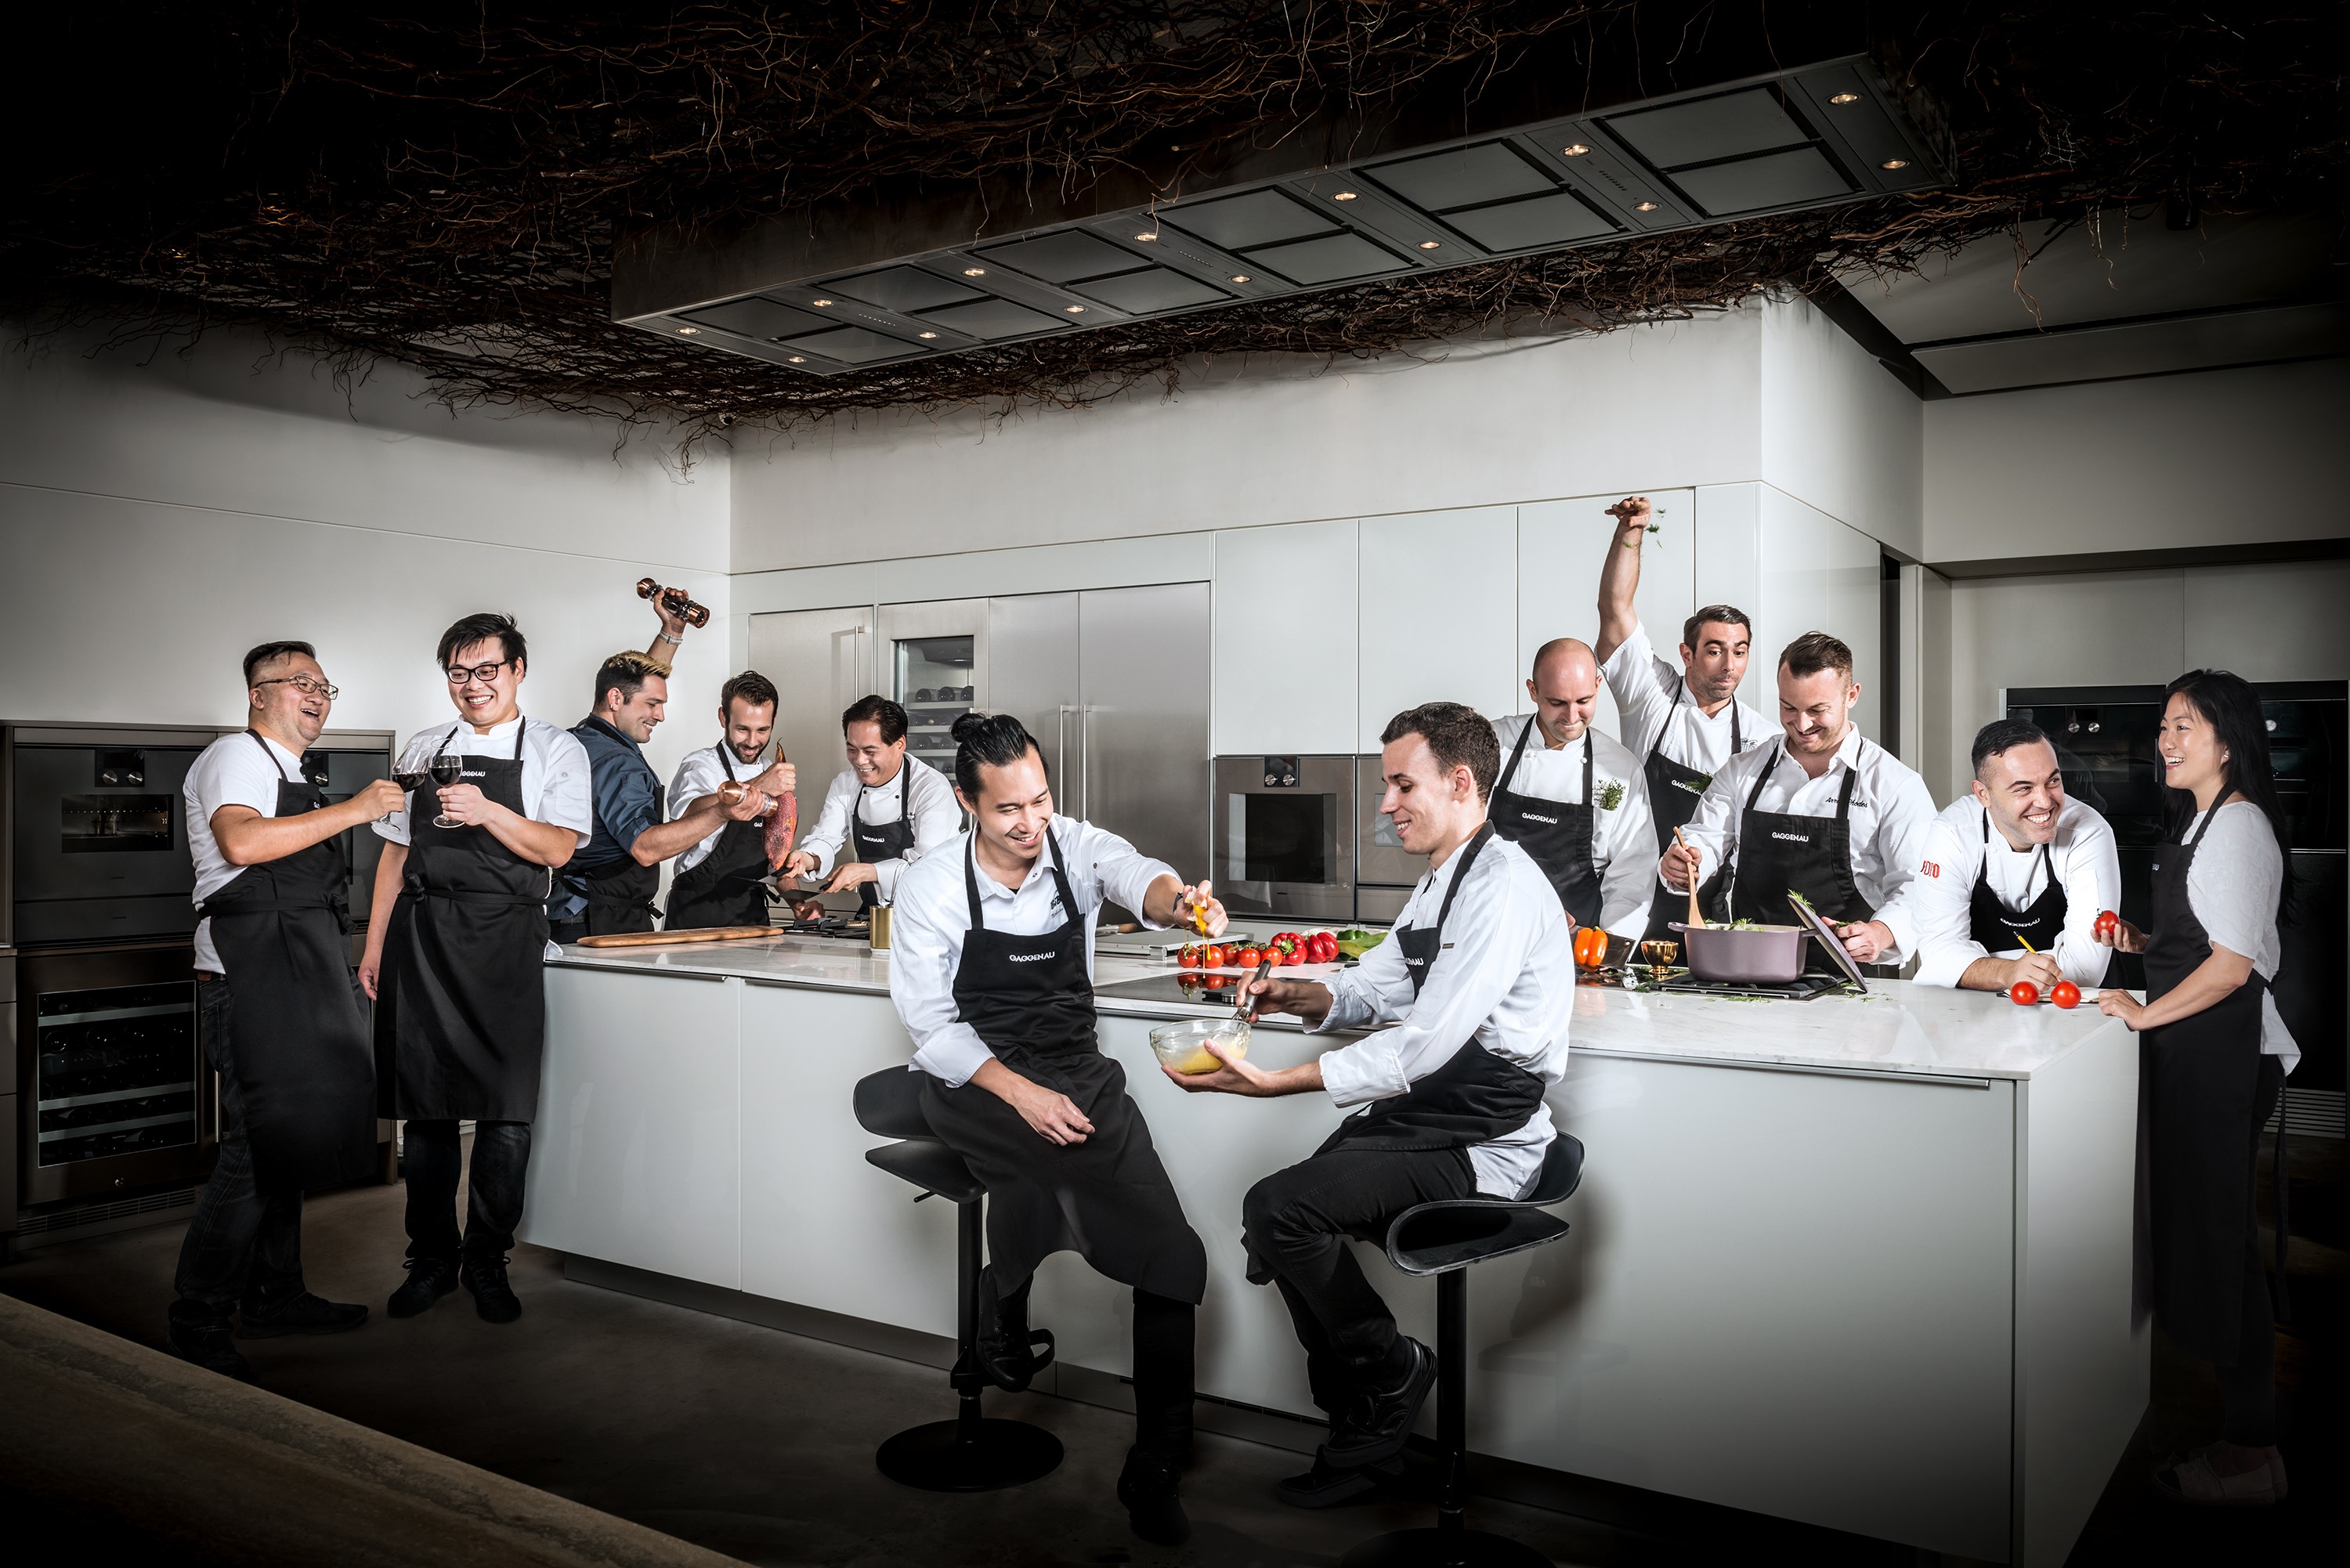 The Gaggenau Culinary Artisans Program features cooking classes and demonstrations by celebrated chefs.